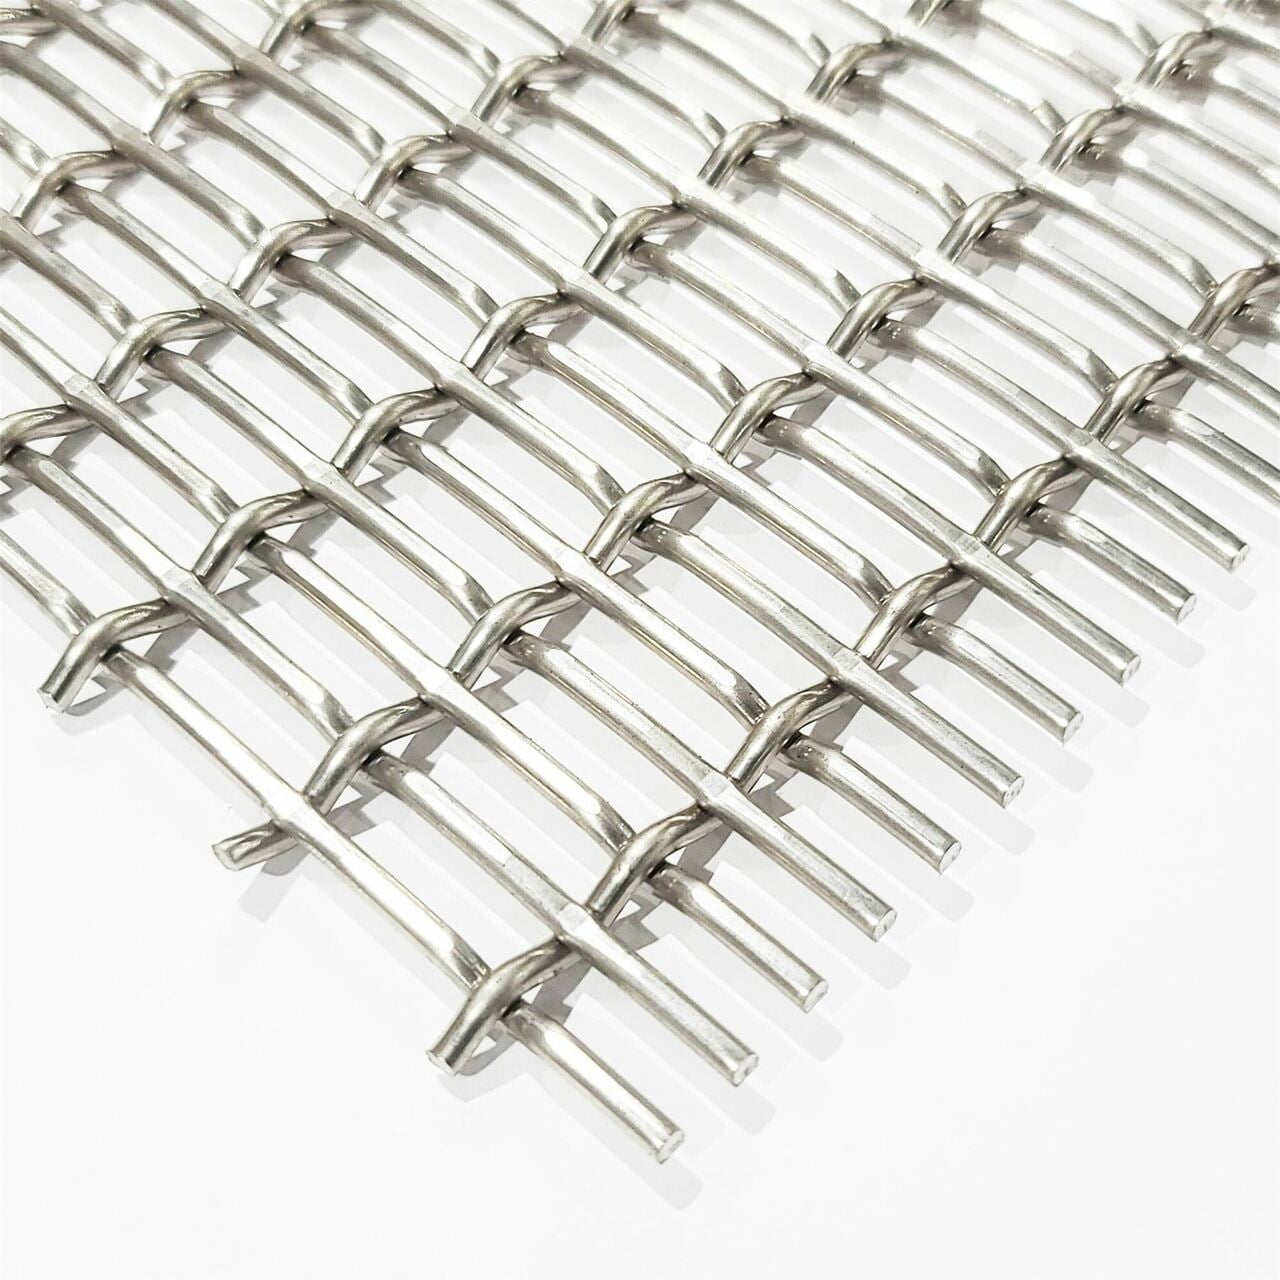 rods 11" long bars 304 Stainless Steel 3/16" Round 4 pack